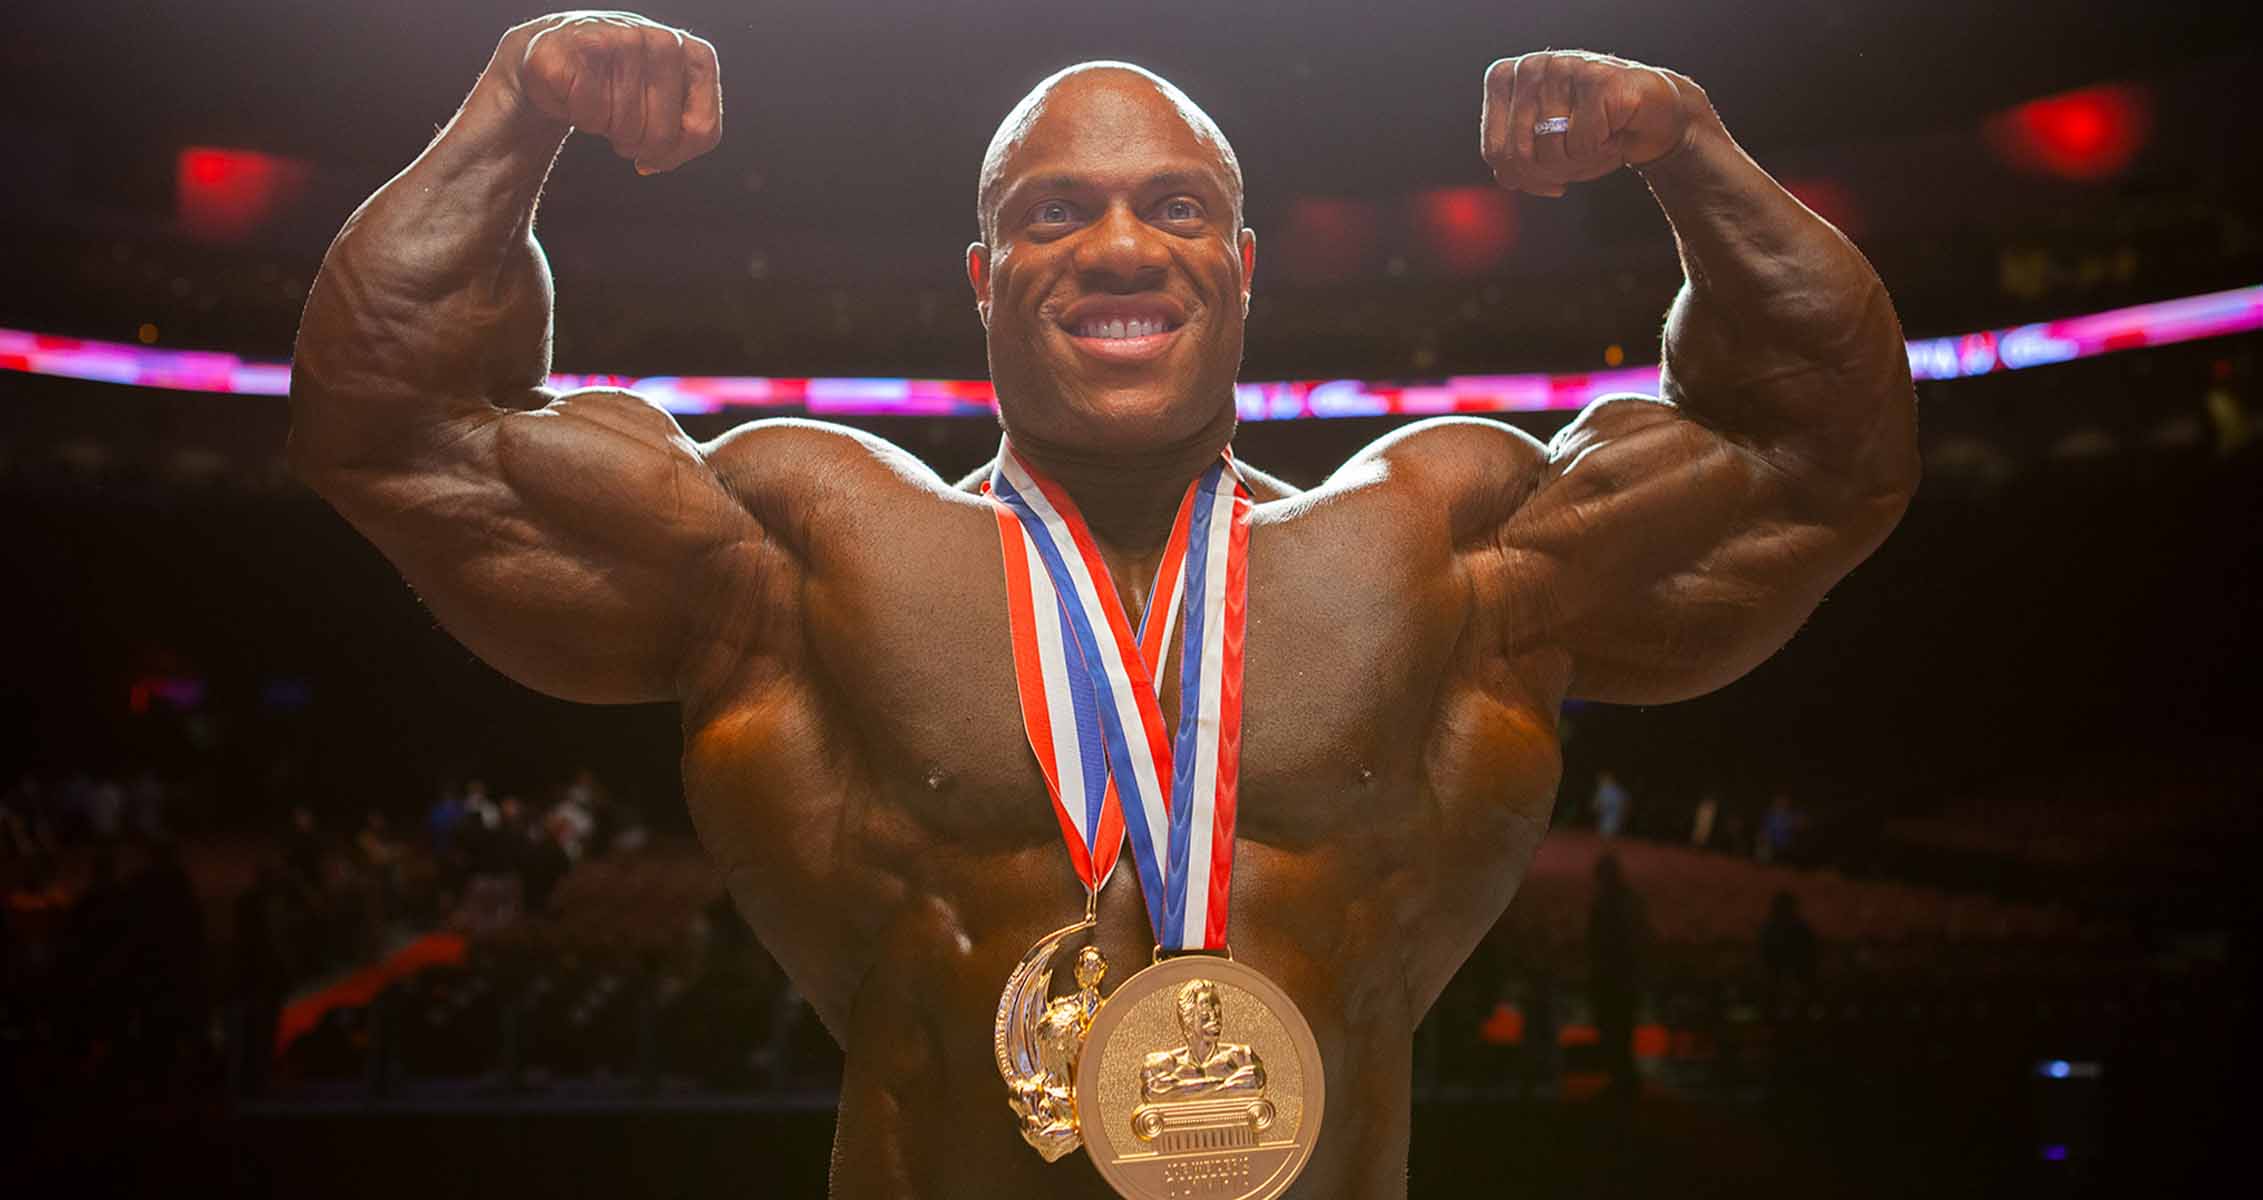 Could Phil Heath & Jay Cutler Return Together? "If You Comeback, I'll